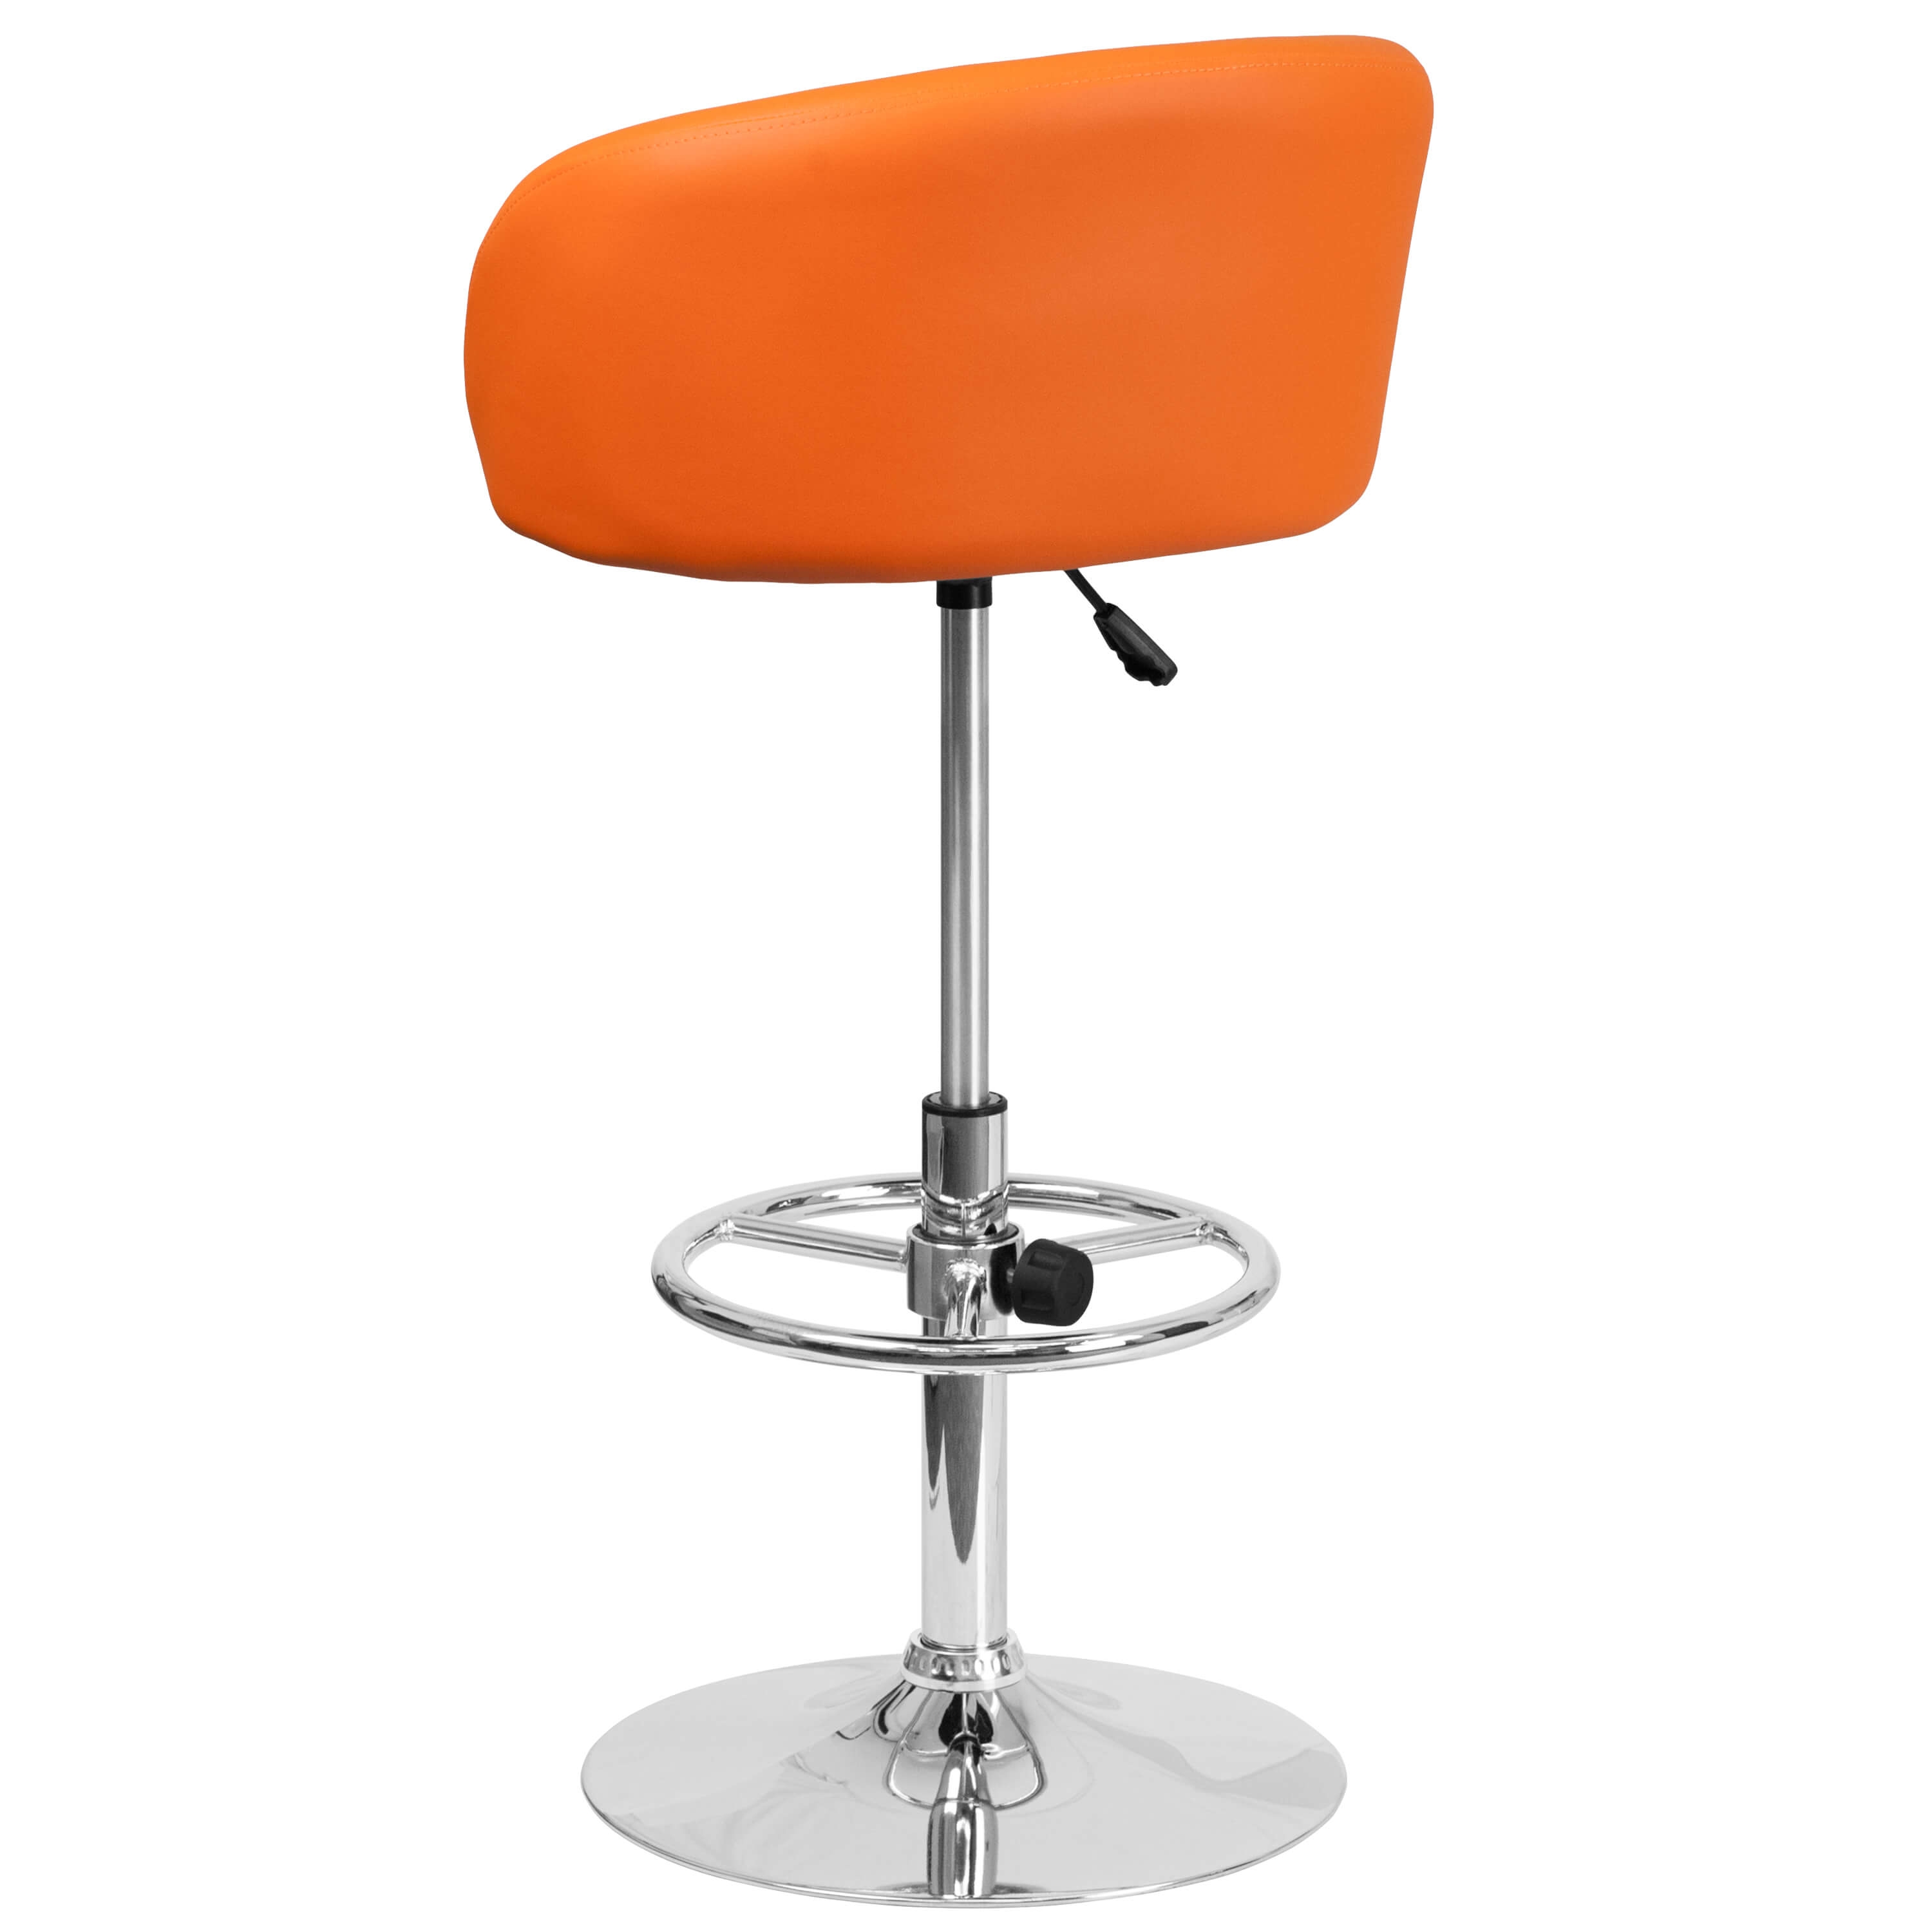 Adjustable colorful bar stools back view